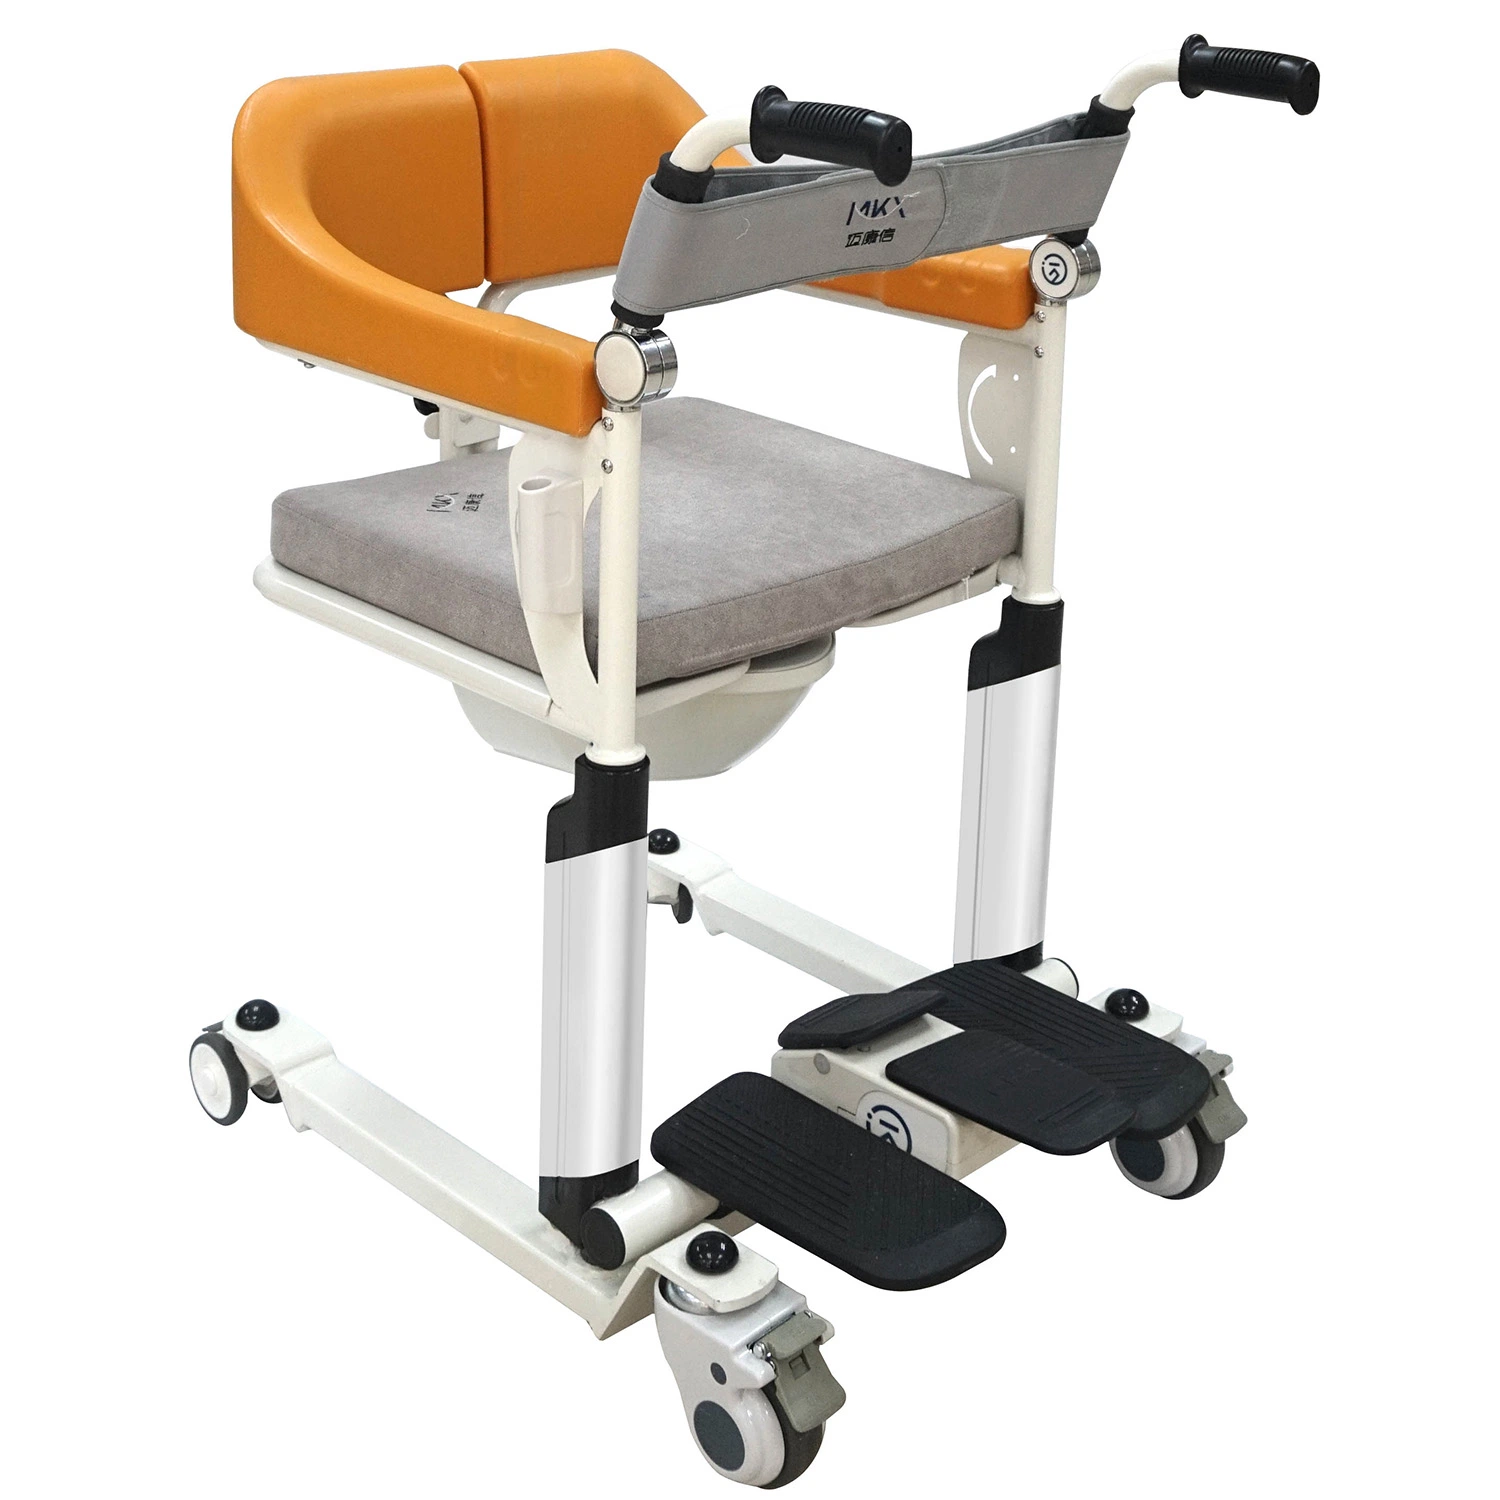 Customized Pregnant Woman Brother Medical Standard Export Carton China Transfer Patient Chair